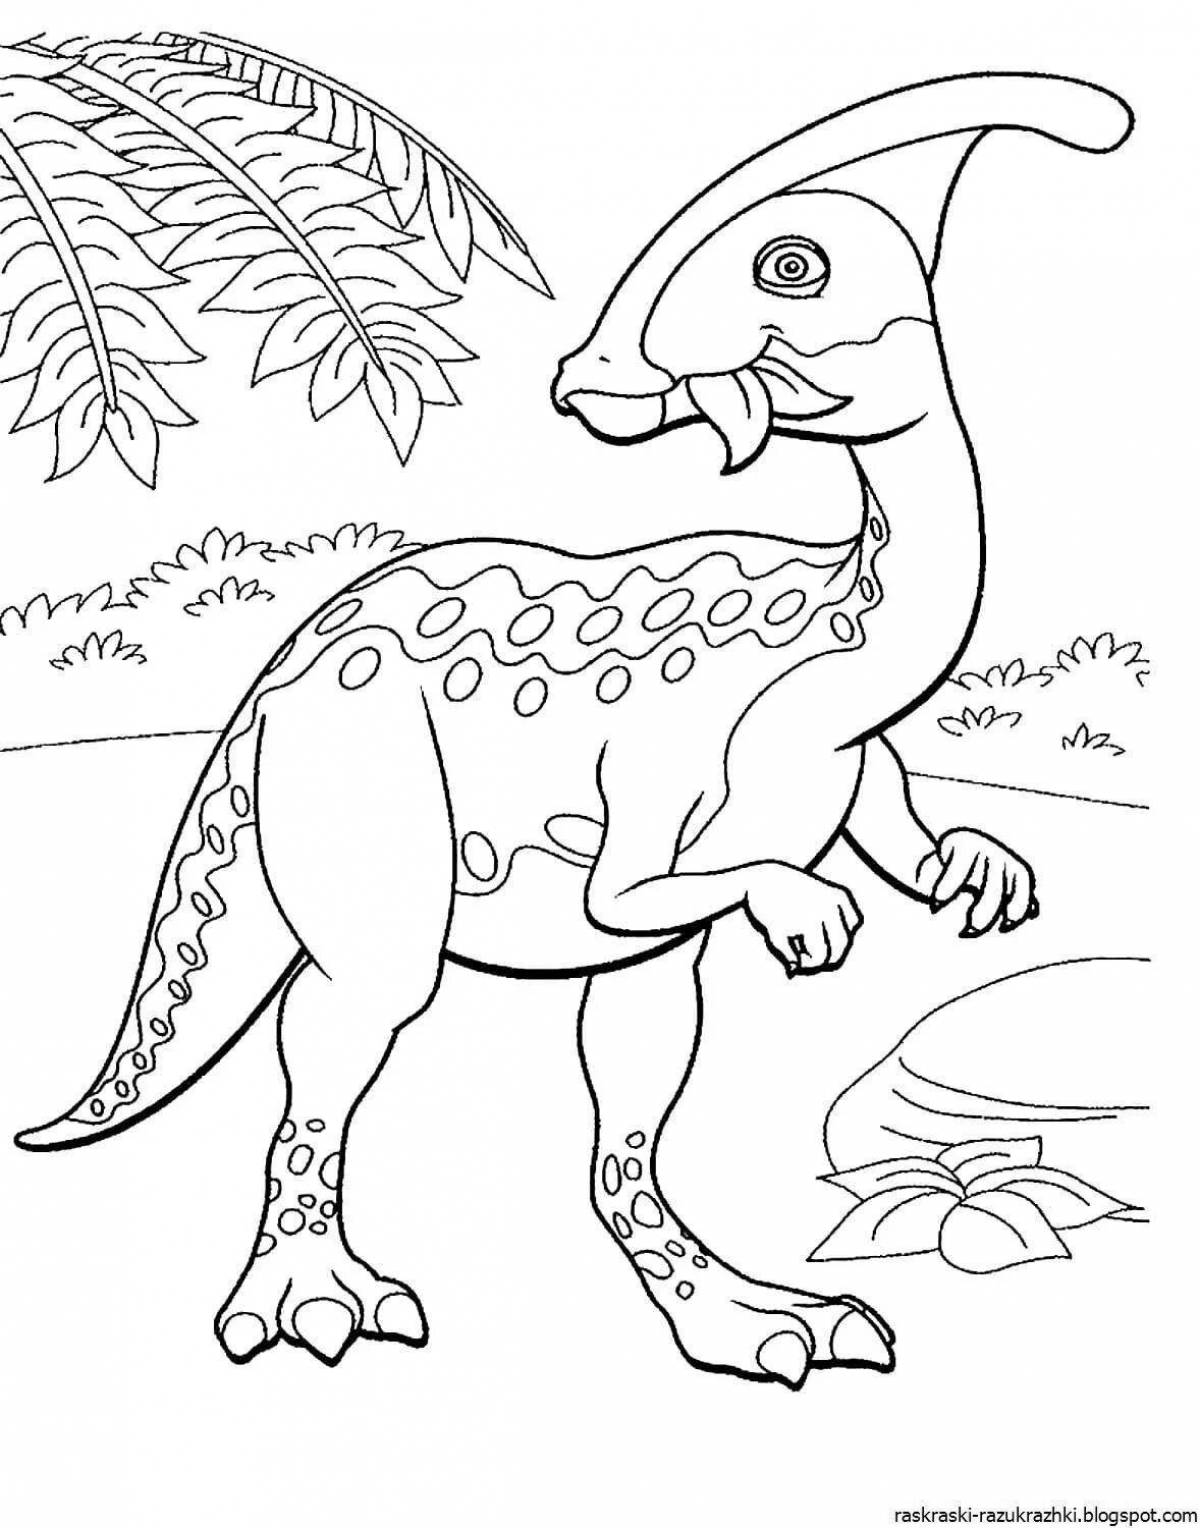 Fantastic dinosaurs coloring for boys 5-7 years old